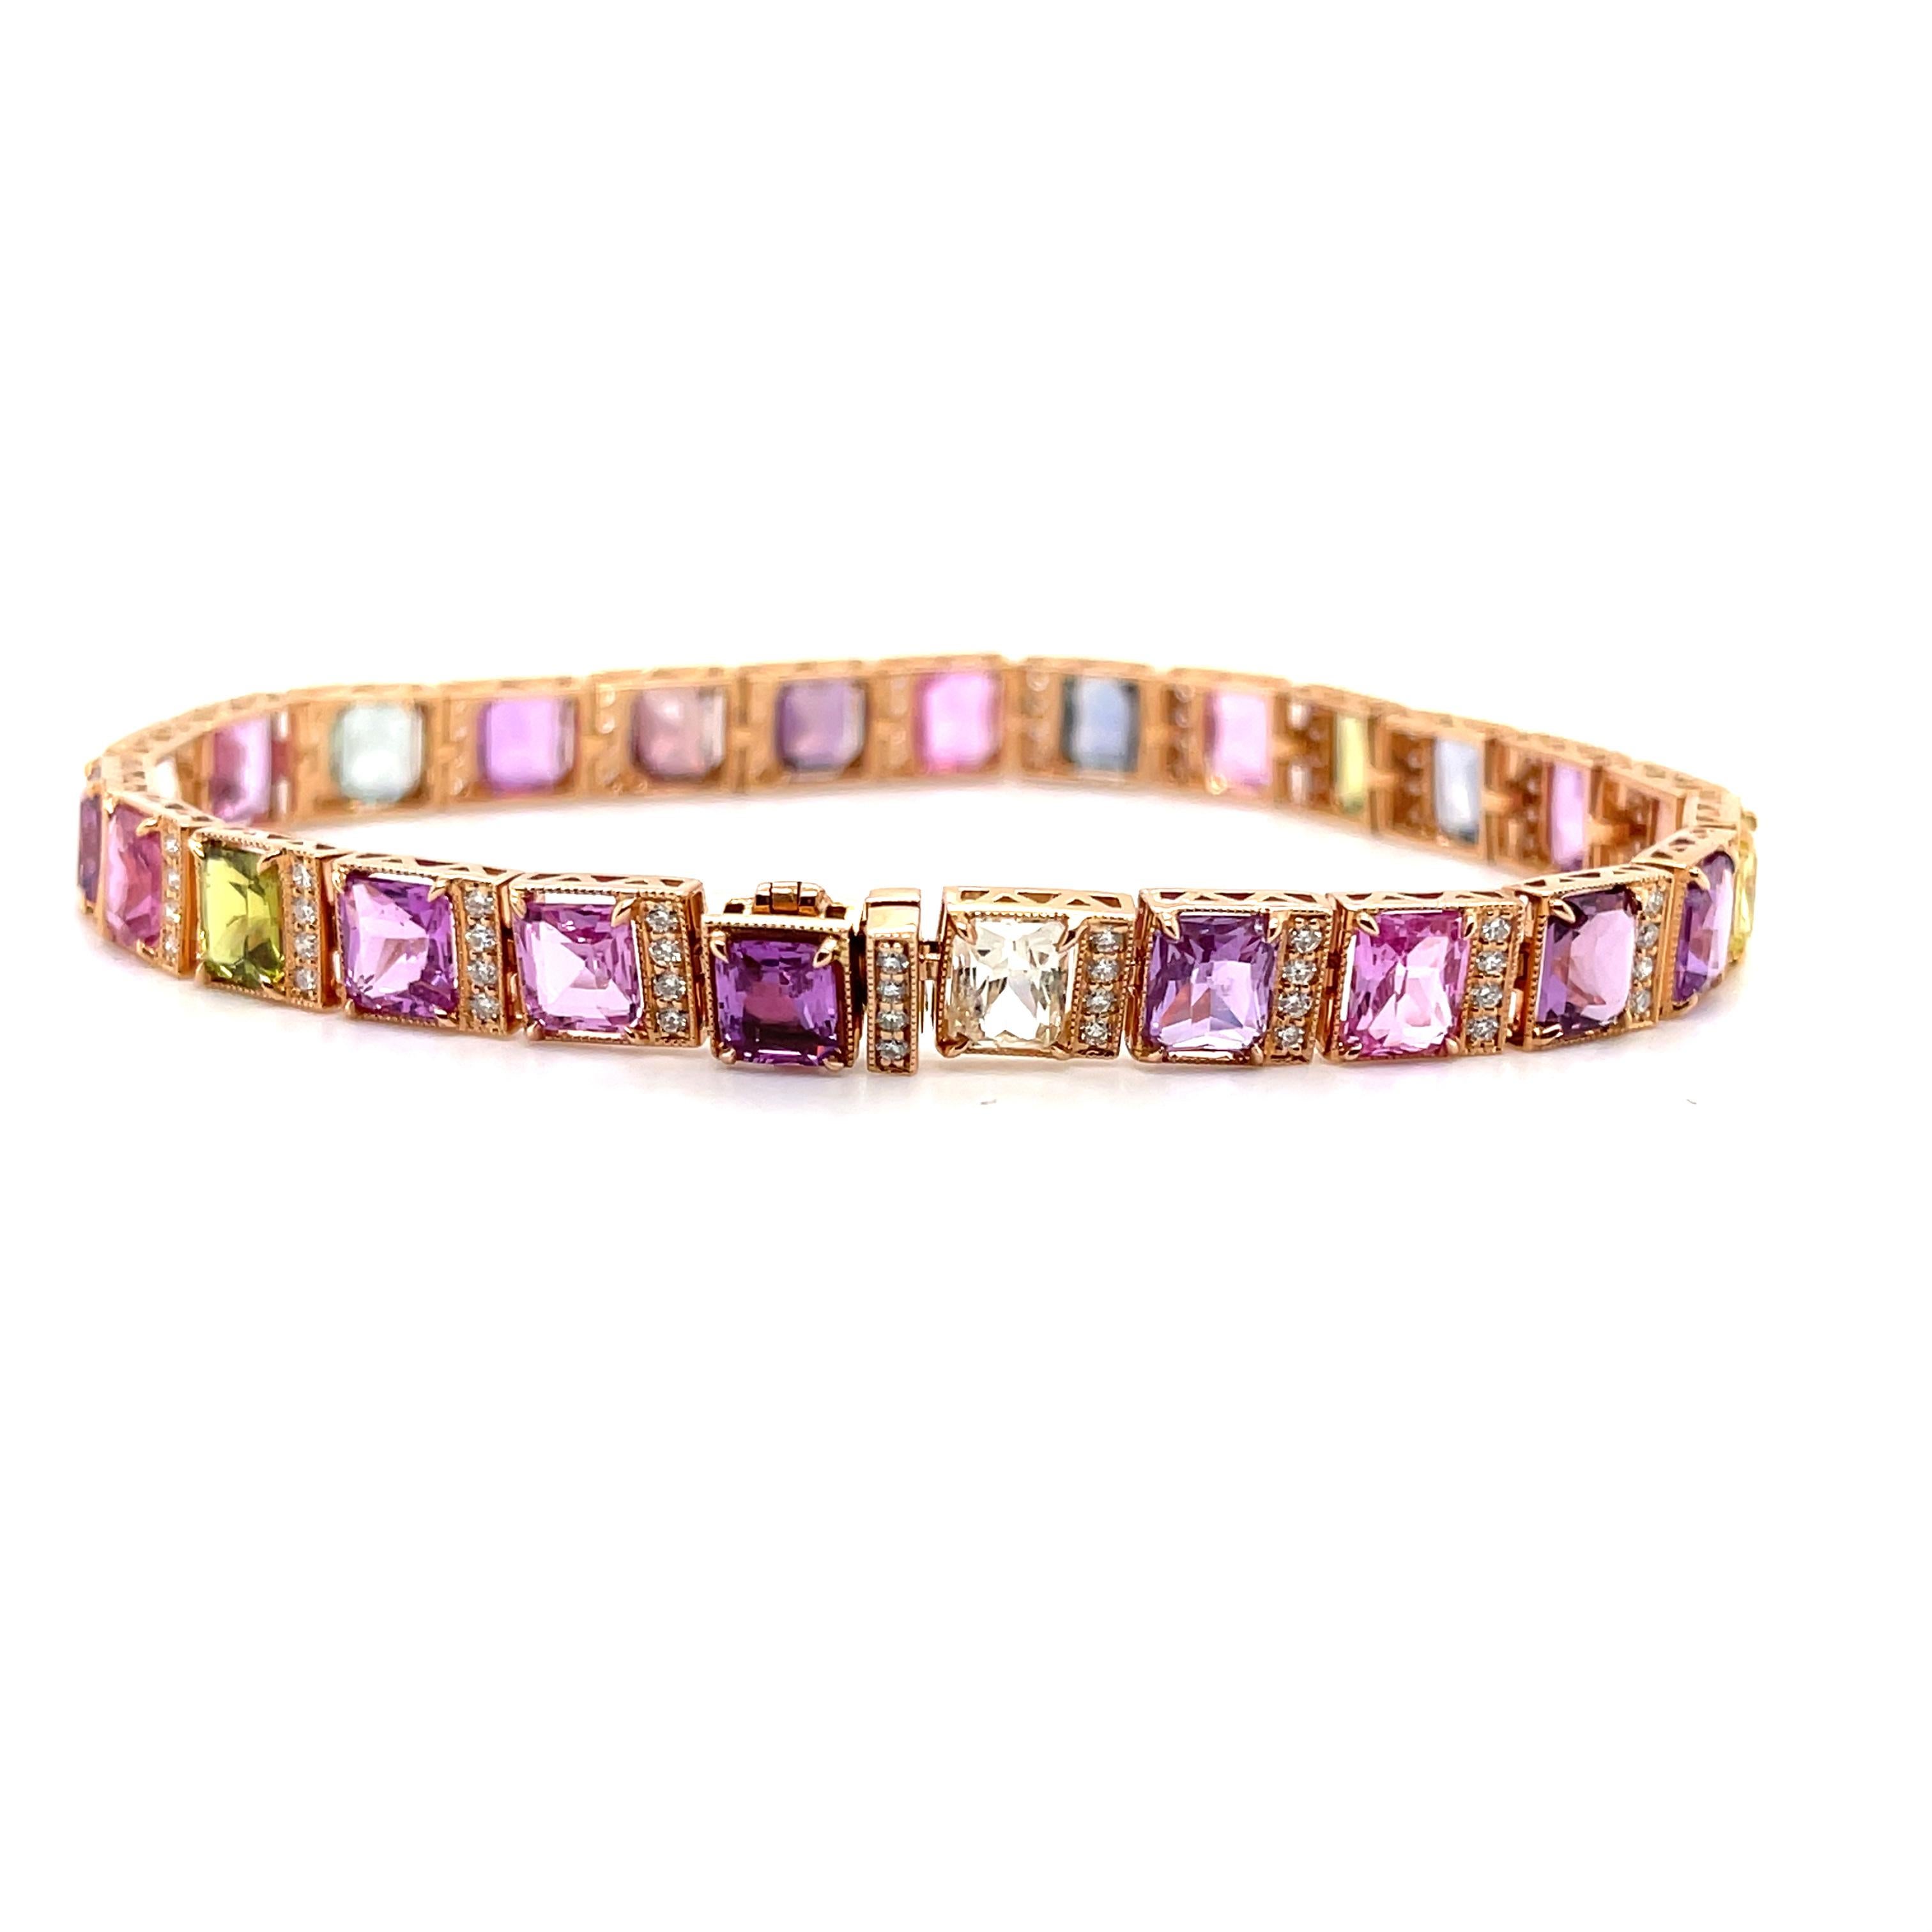 A phenomenal assorted fancy, radiant cut, (no heat)(based on my opinion)  sapphire and round brilliant cut diamond 18ct rose gold bracelet. 

Total Sapphire Weight: 20.19ct

Sapphire Grade/Colour: (Purple, blue, yellow, pink, green, orange) Tones-